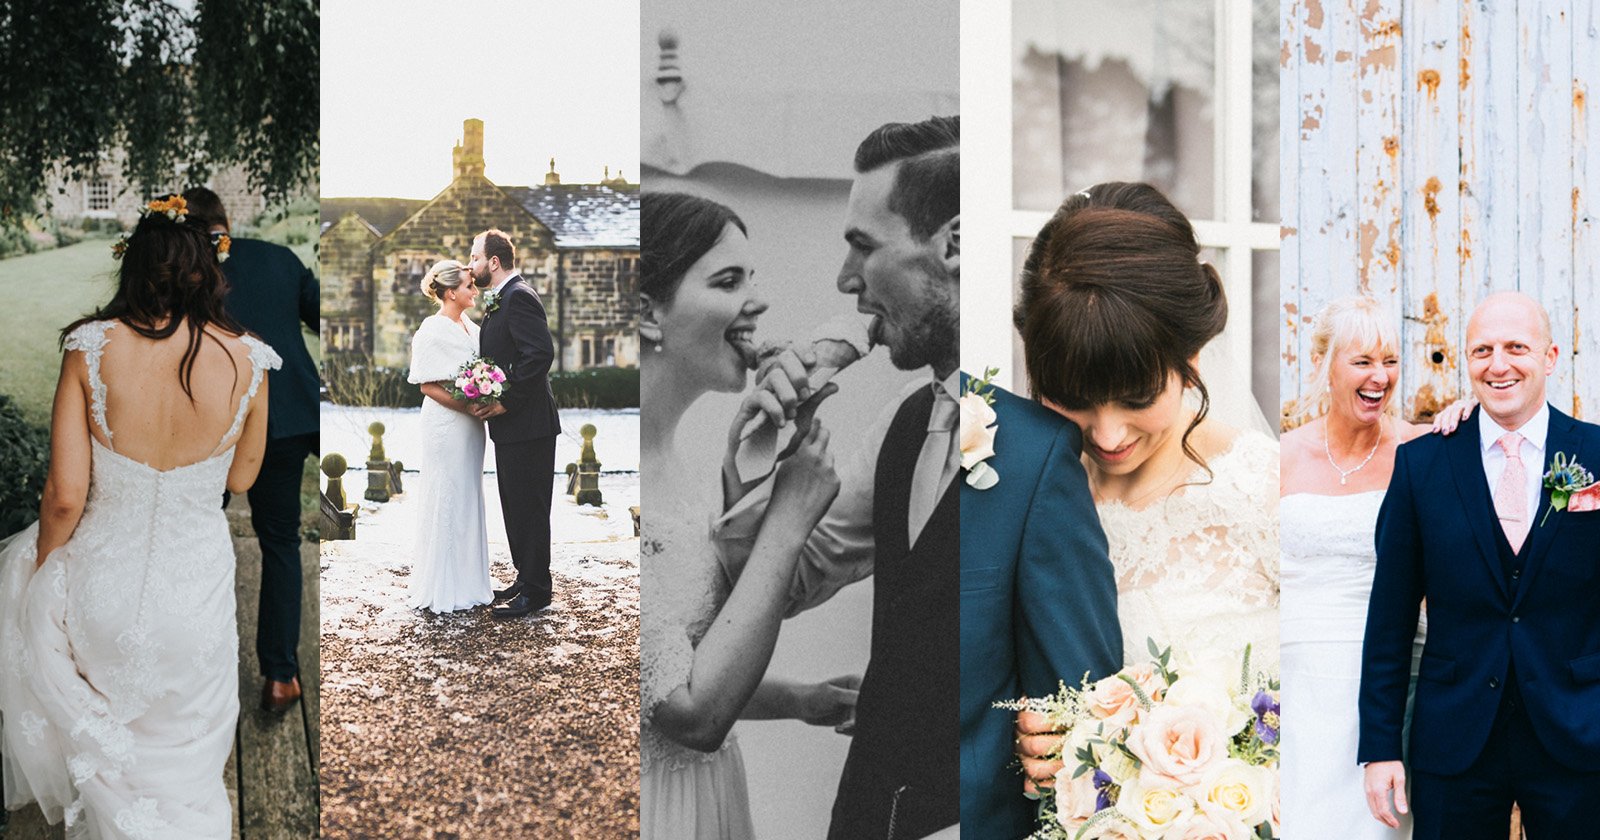 10 Important Lessons Ive Learned as a Professional Wedding Photographer